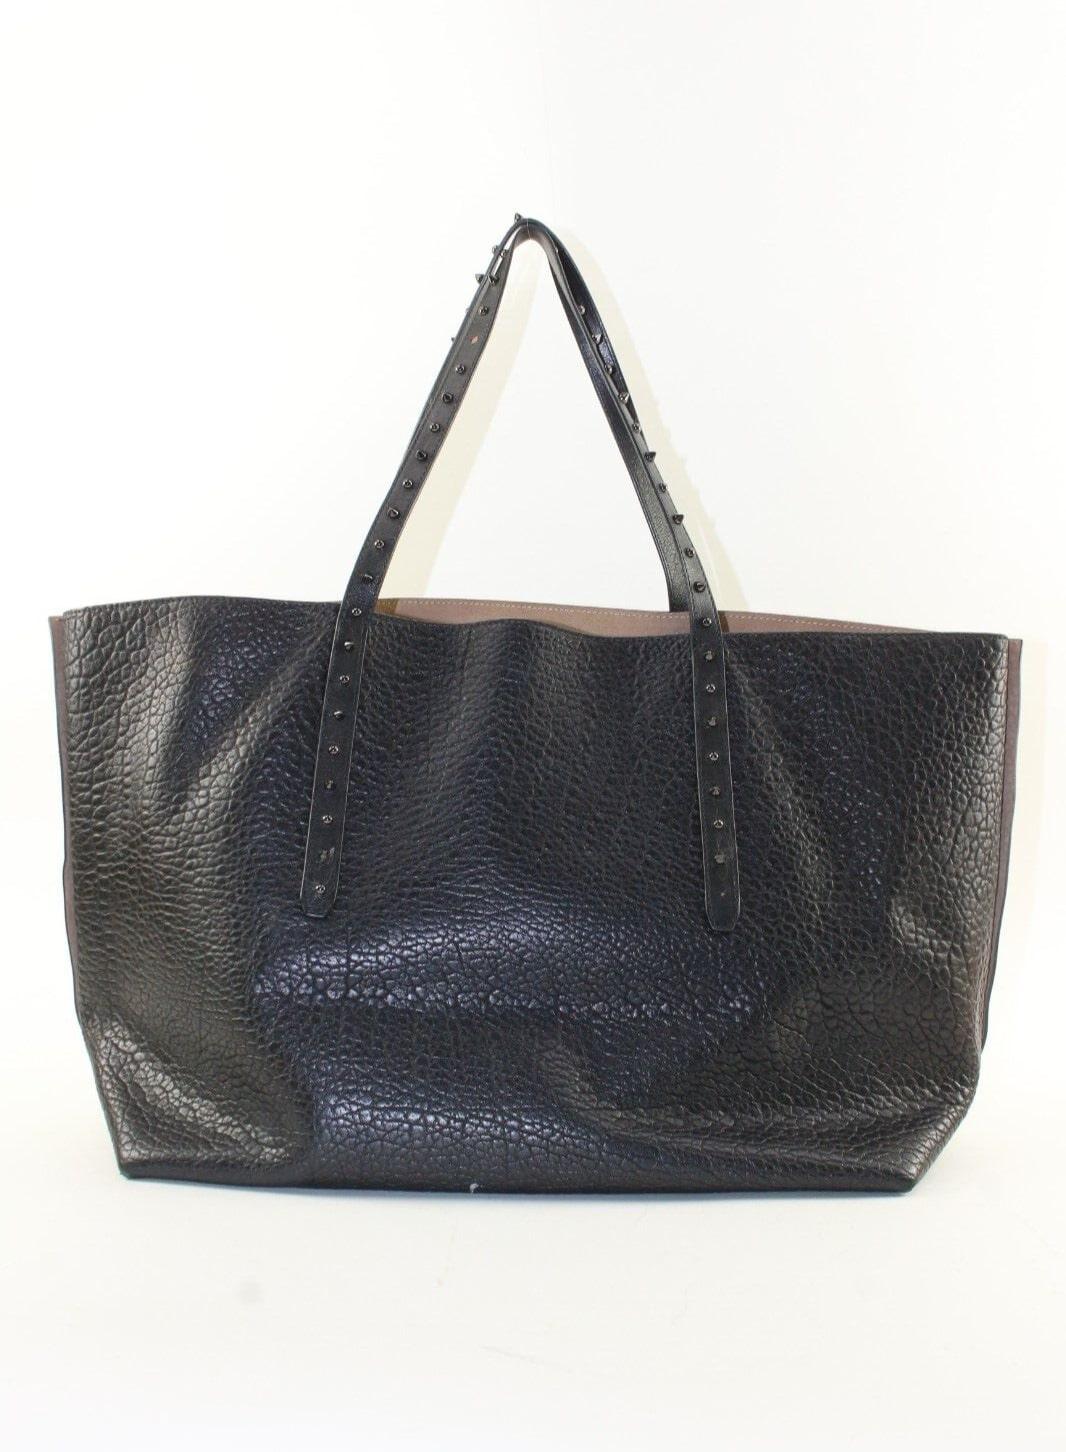 JIMMY CHOO Black Leather Studded Tote Spike Grommet Rivet 4JC1220K In Good Condition For Sale In Dix hills, NY